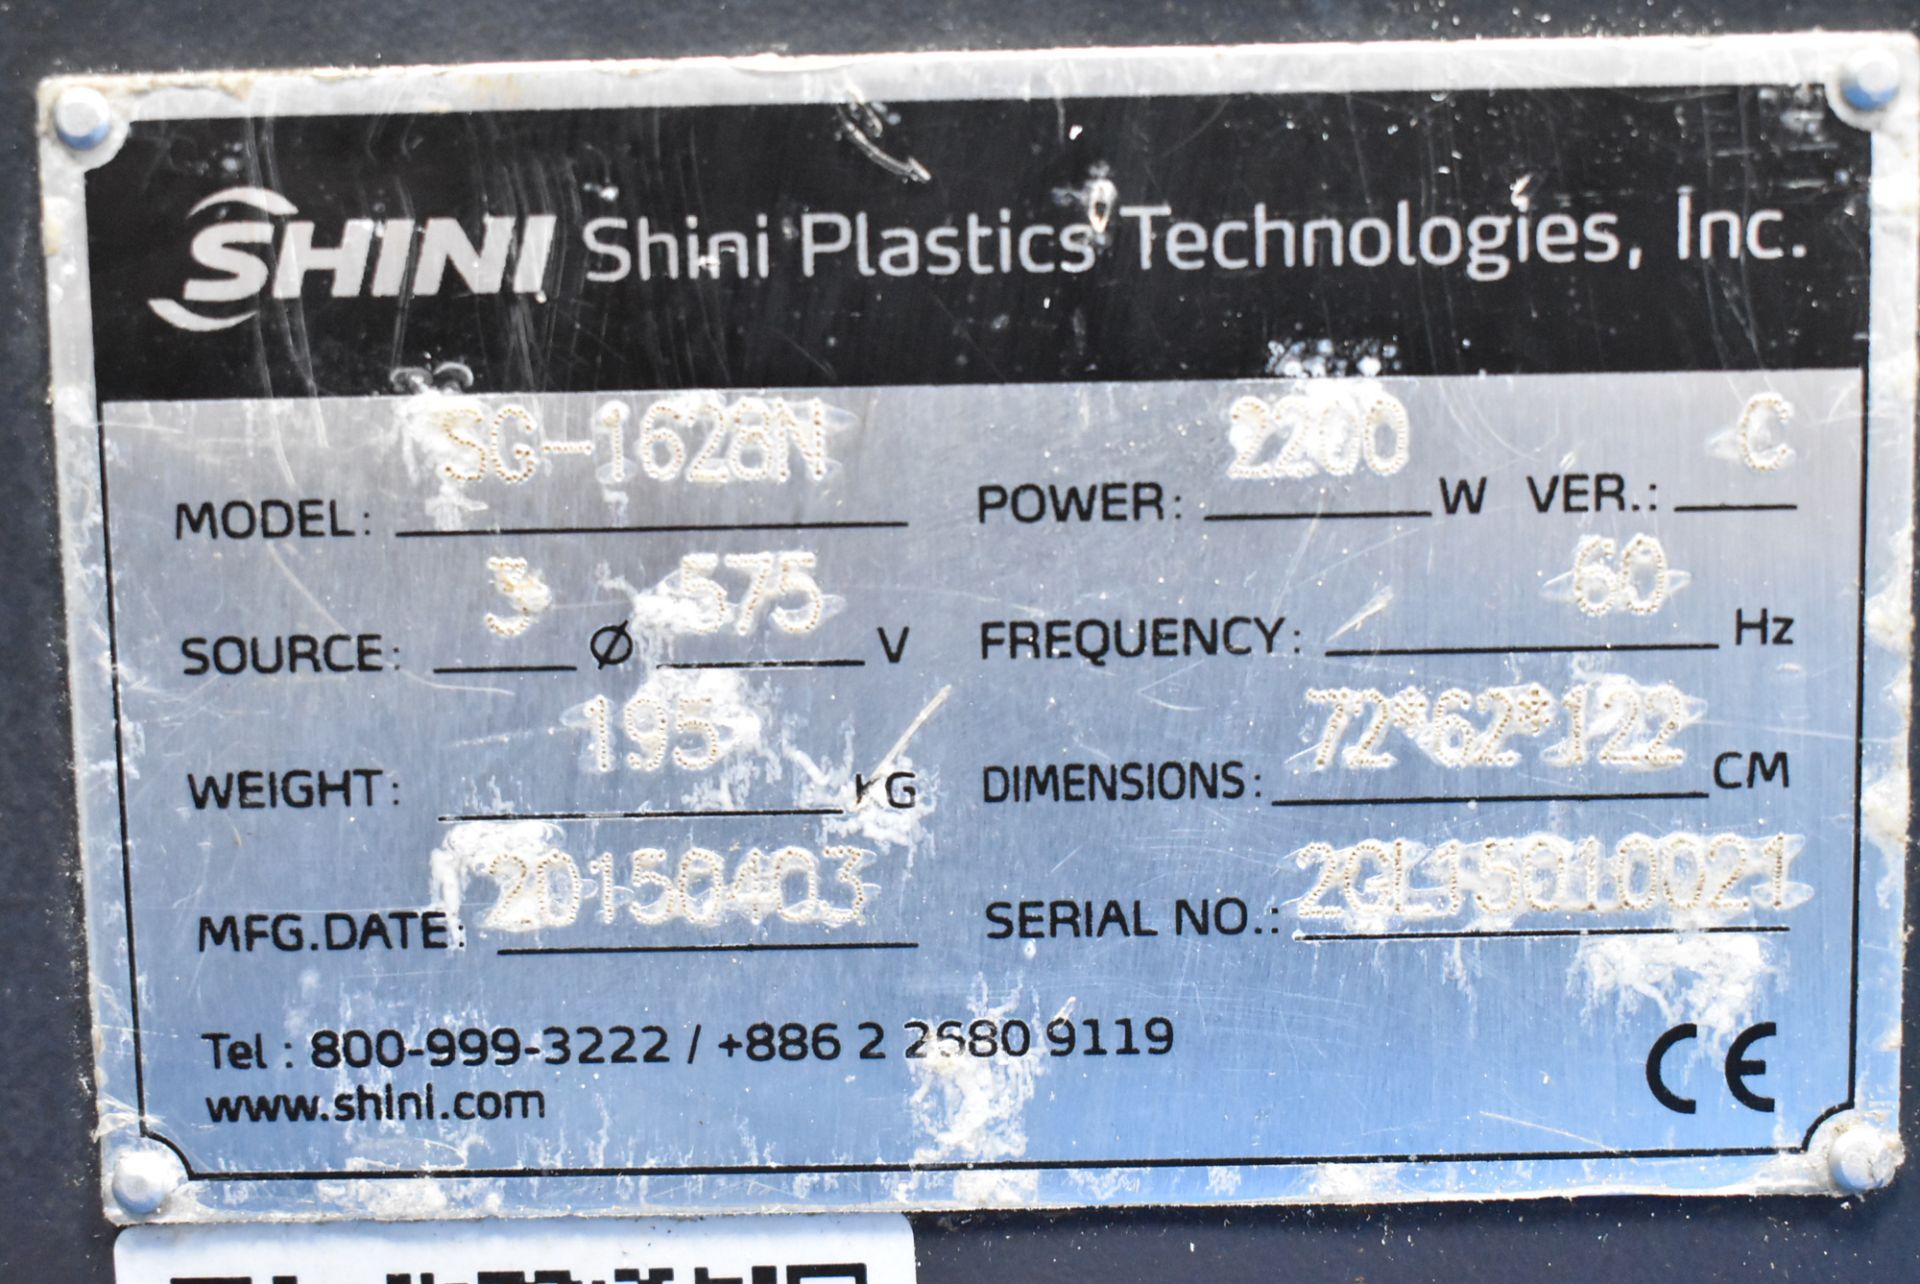 SHINI SG-1628N LOW SPEED PORTABLE GRANULATOR WITH 11" X 8" APERTURE, 3 HP, 285 RPM, S/N: HPS15-8256 - Image 5 of 5